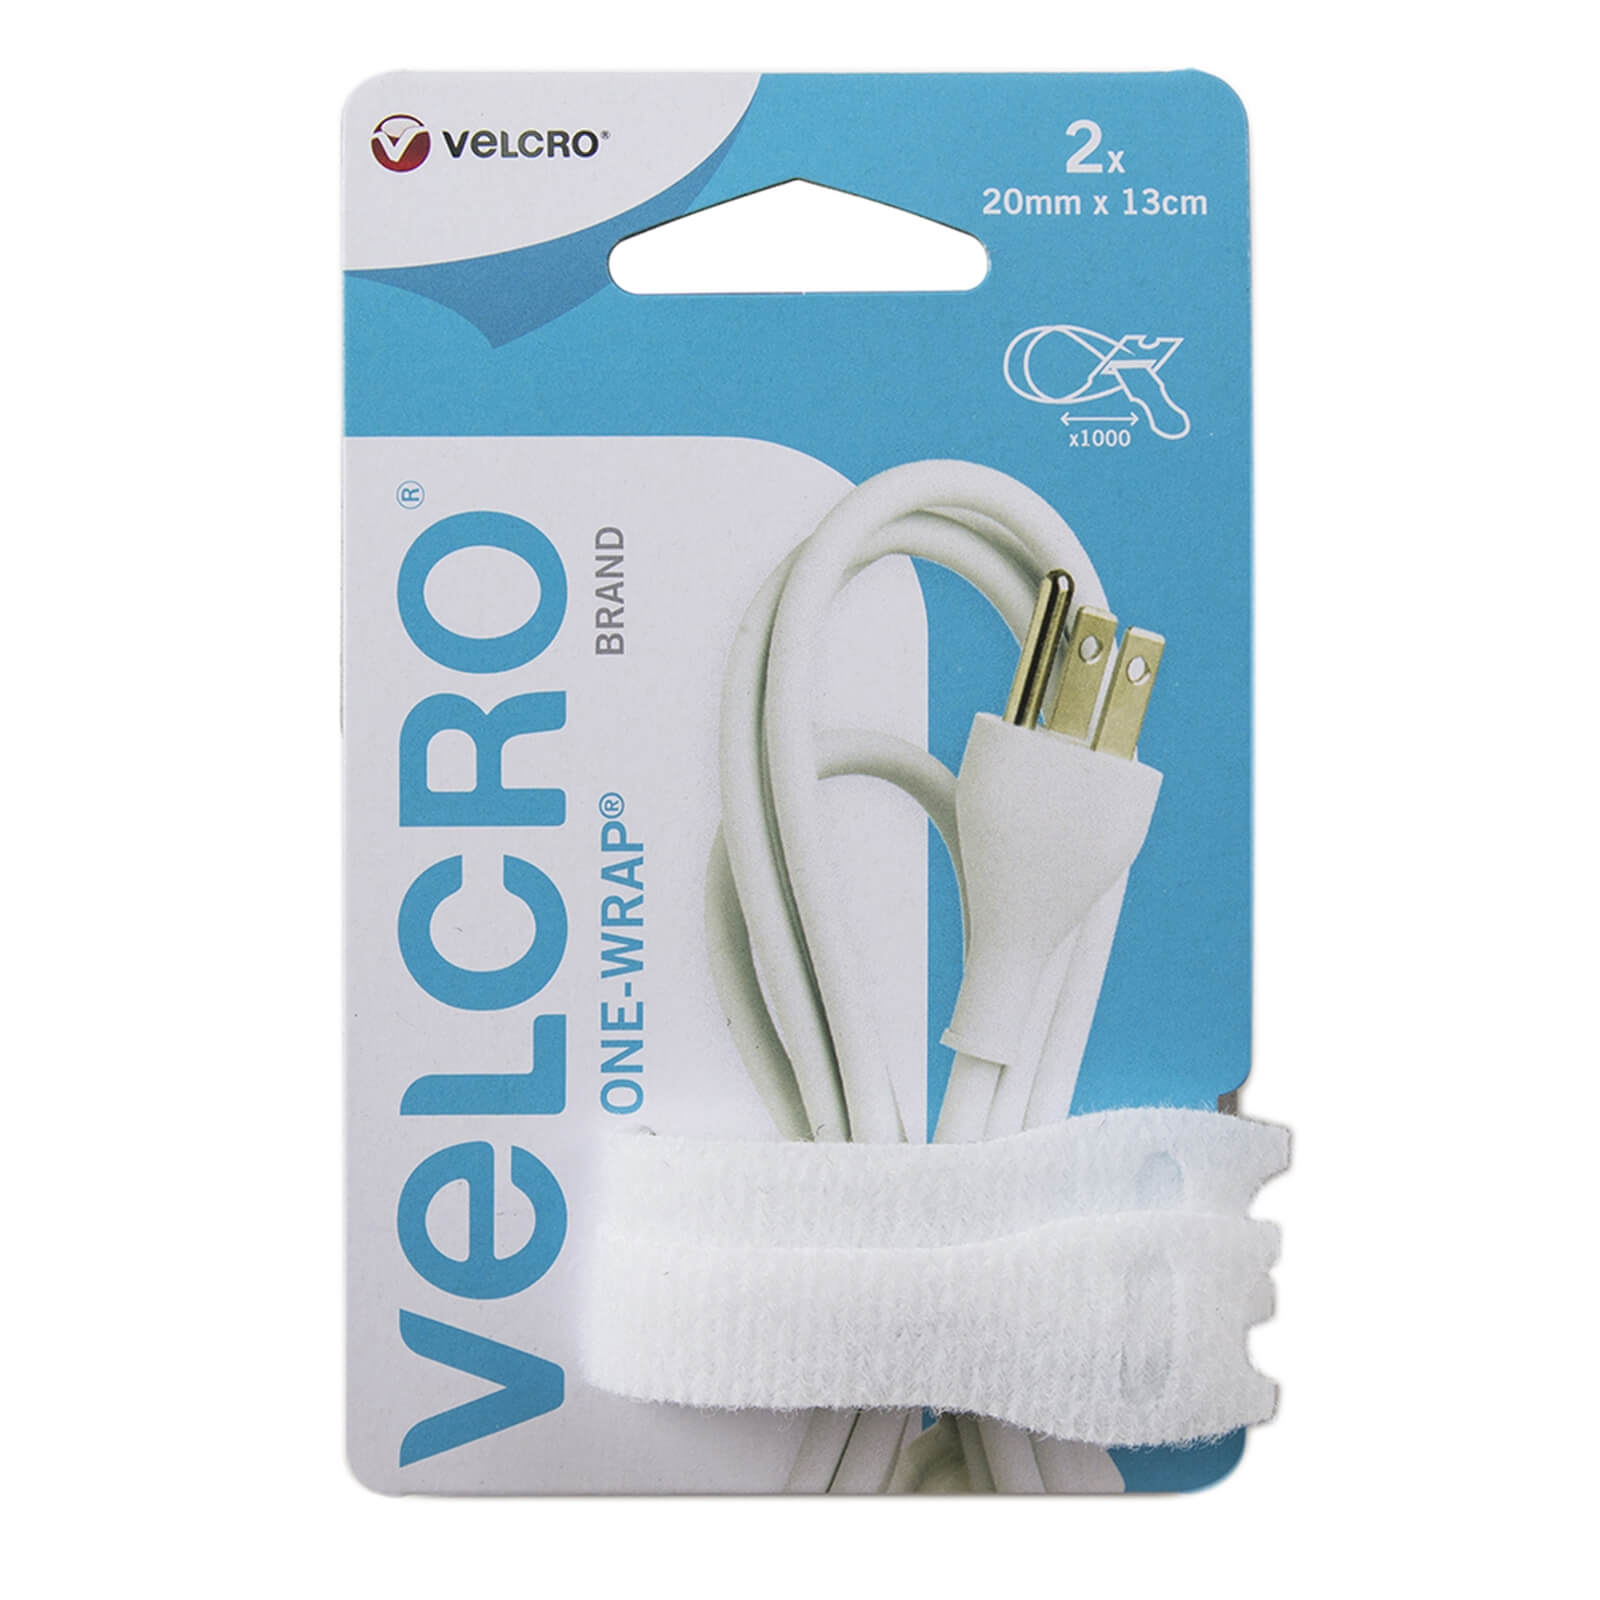 VELCRO? Brand ONE-WRAP? Snack Size Cable Ties White